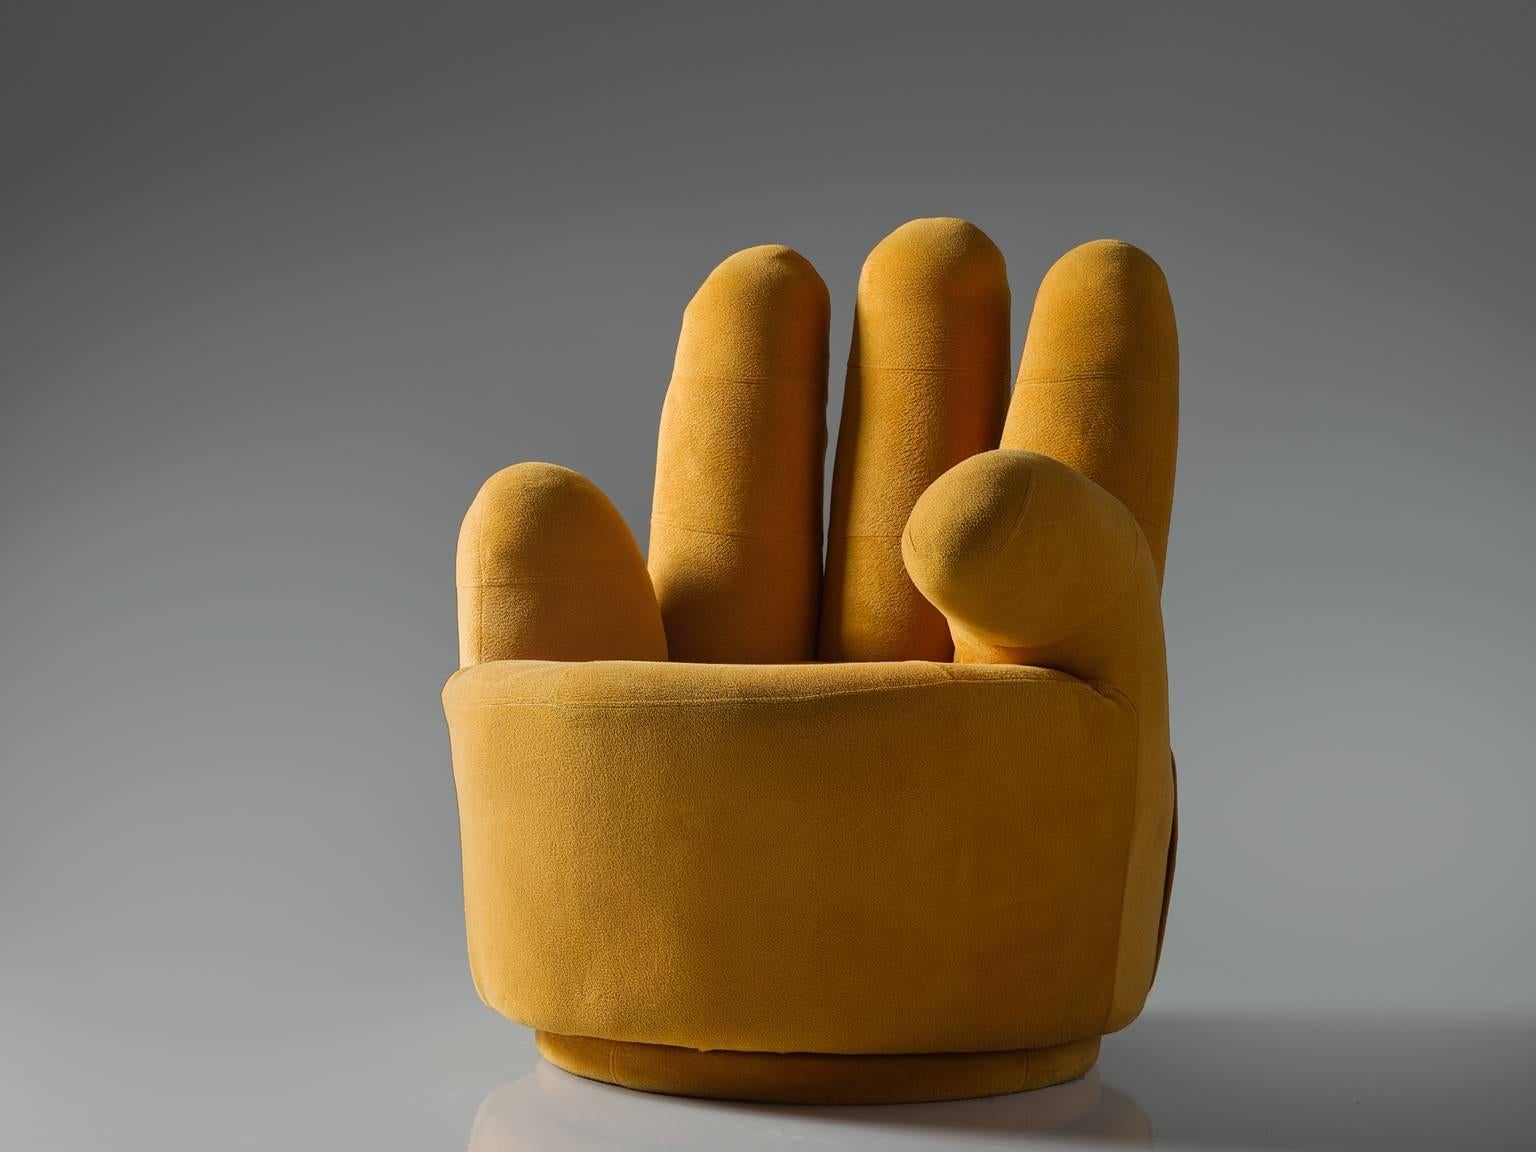 Lounge chair, fabric, Italy, 1970s

This reupholstered postmodern chair is one with a cheeky wink. It is shaped in the form of a hand and upholstered in a bright orange to yellow color. It is a typical object from the postwar age where everyday